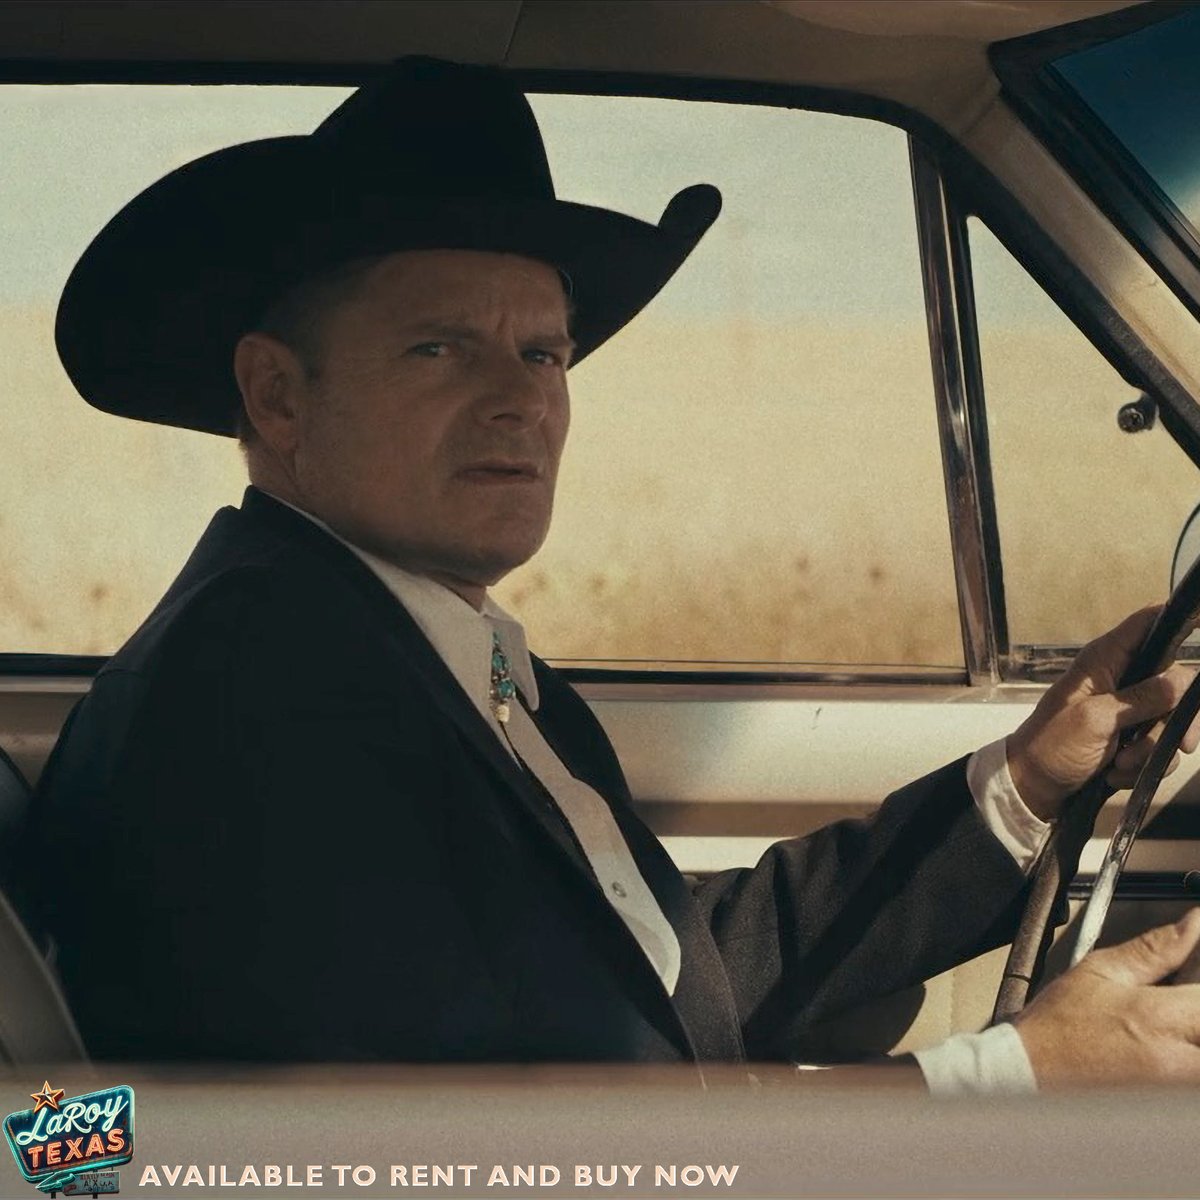 LaRoy, Texas is available to rent & buy now on @primevideouk 👇 amazon.co.uk/gp/video/detai… Make sure you've got this darkly comedic thriller with Past Lives' John Magaro & The White Lotus' Steve Zahn on your #weekend watchlist